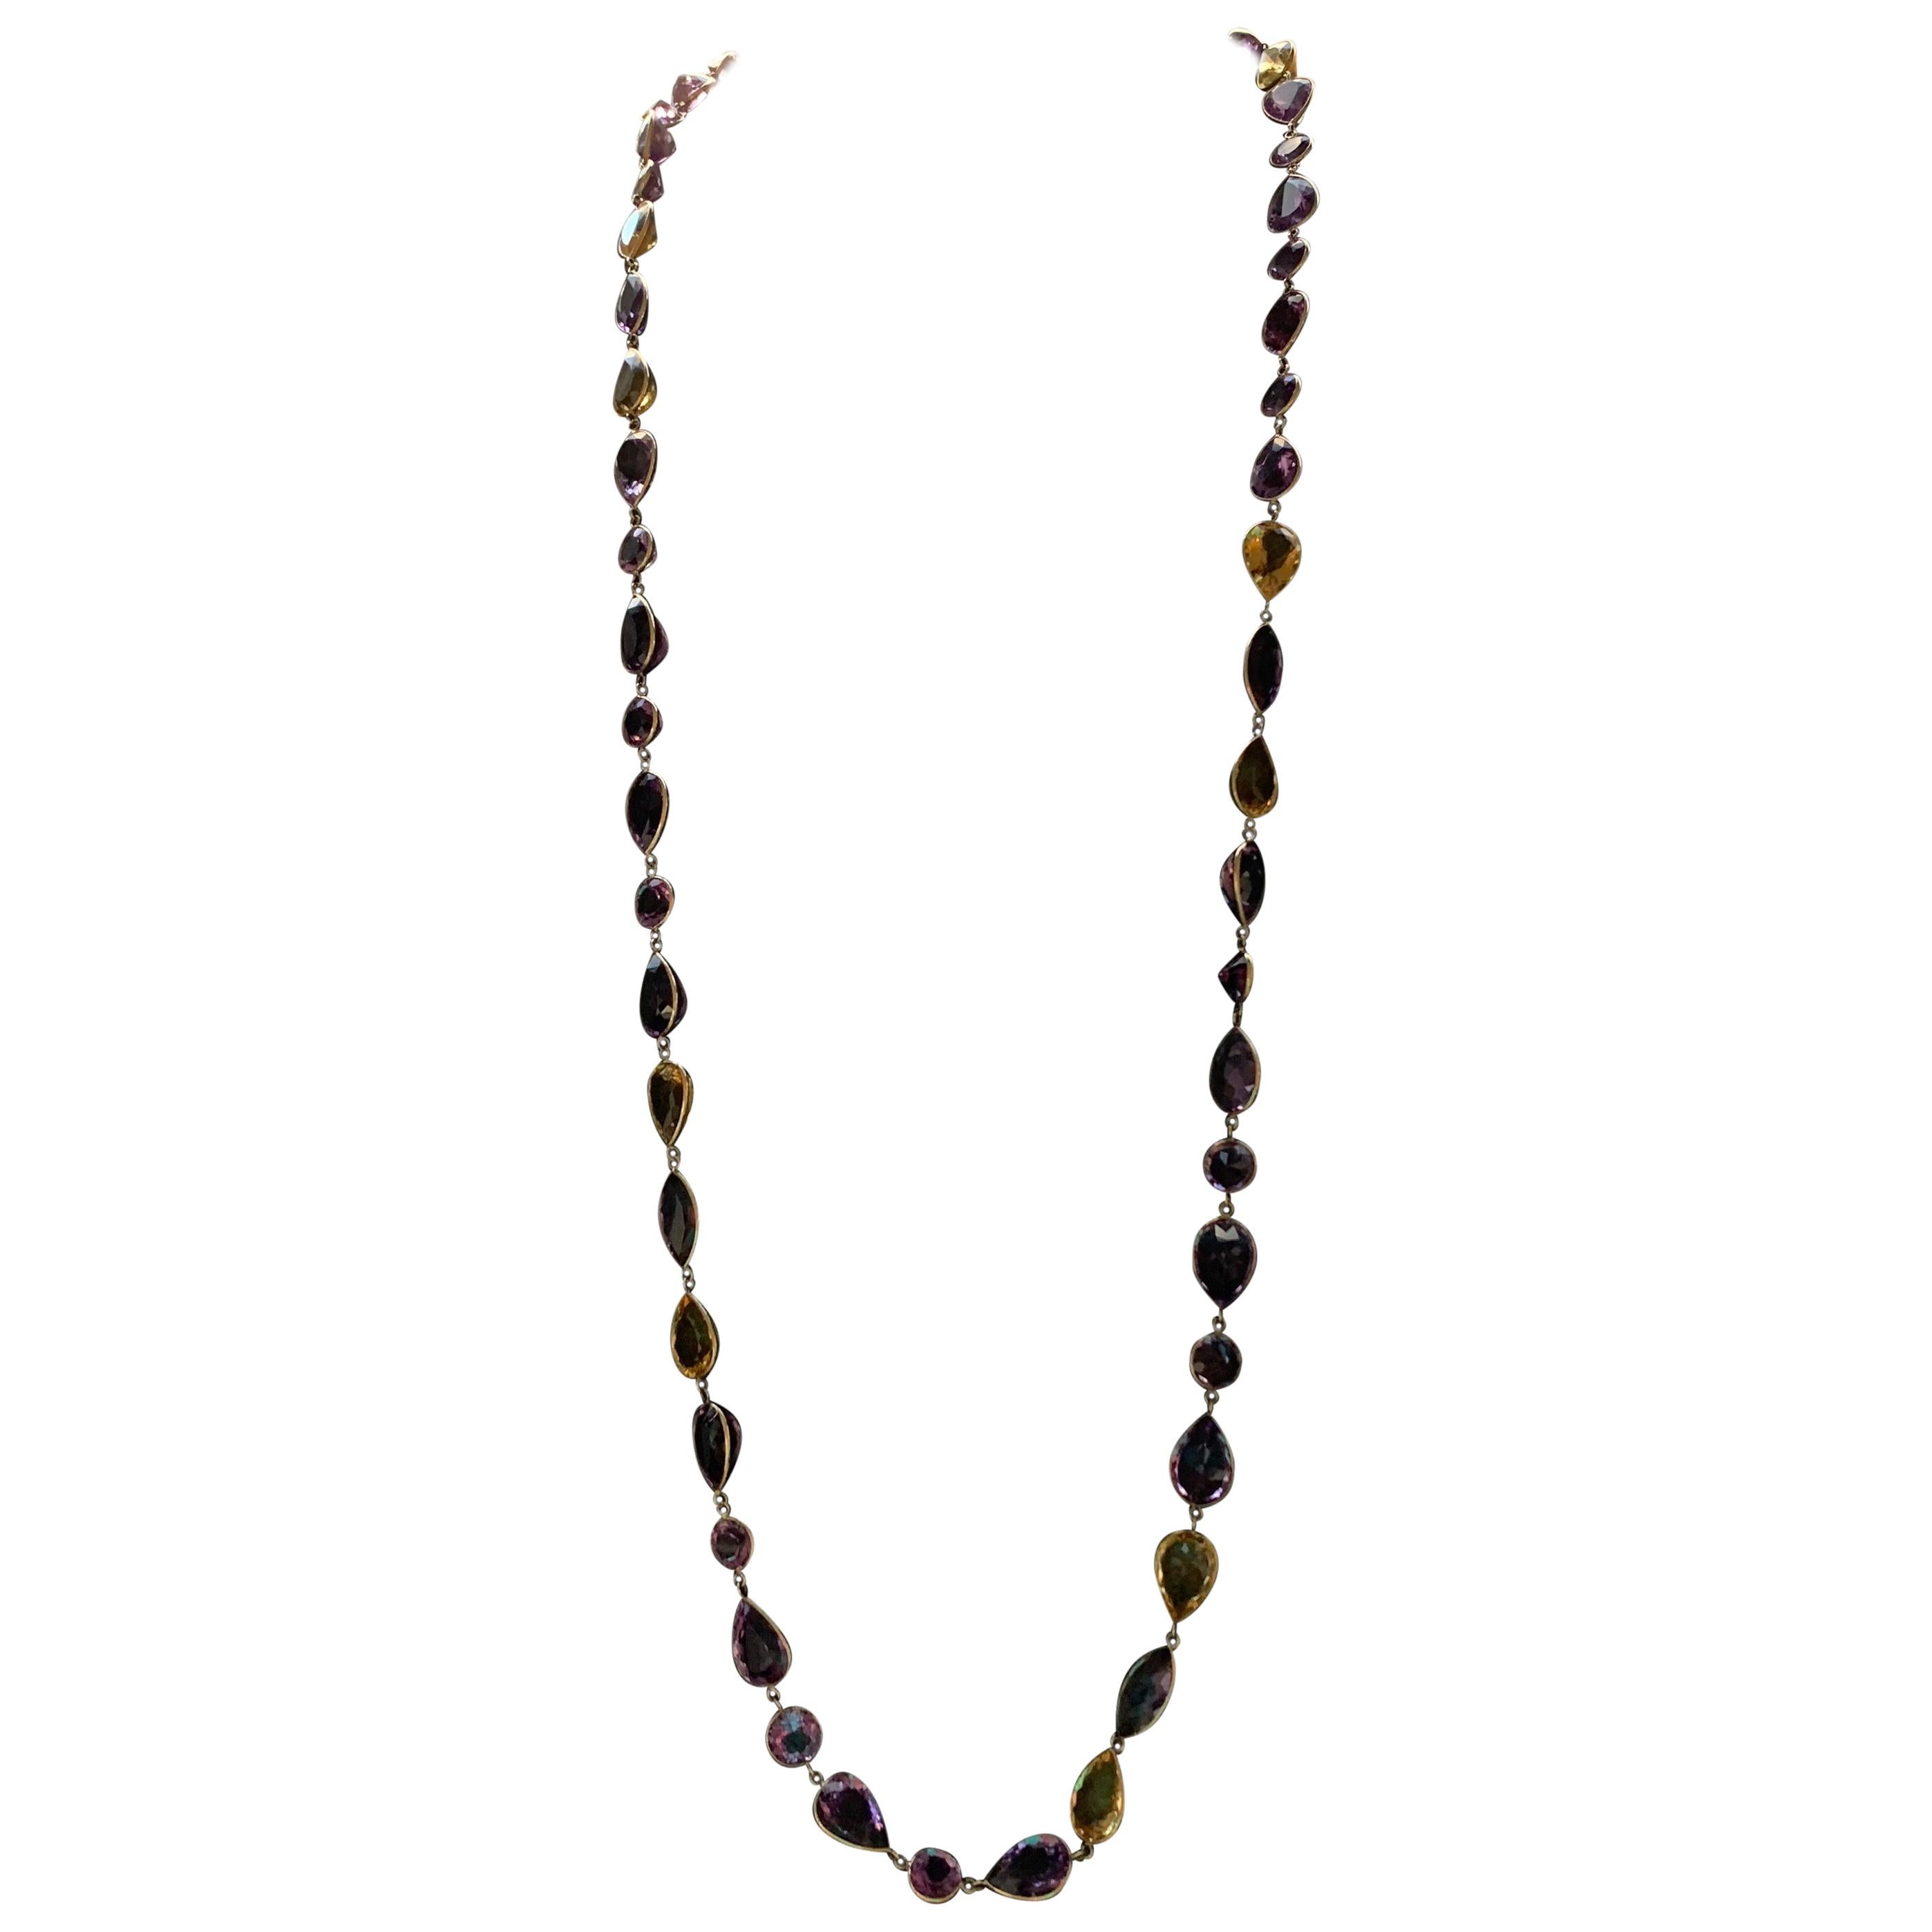 Amethyst and Citrine Long Chain
Approx 43 inches long!
Can be layered multiple times for different looks
42 amethysts approx 336 cts
12 citrines approx 125 cts
In the style of Diamonds by the Yard